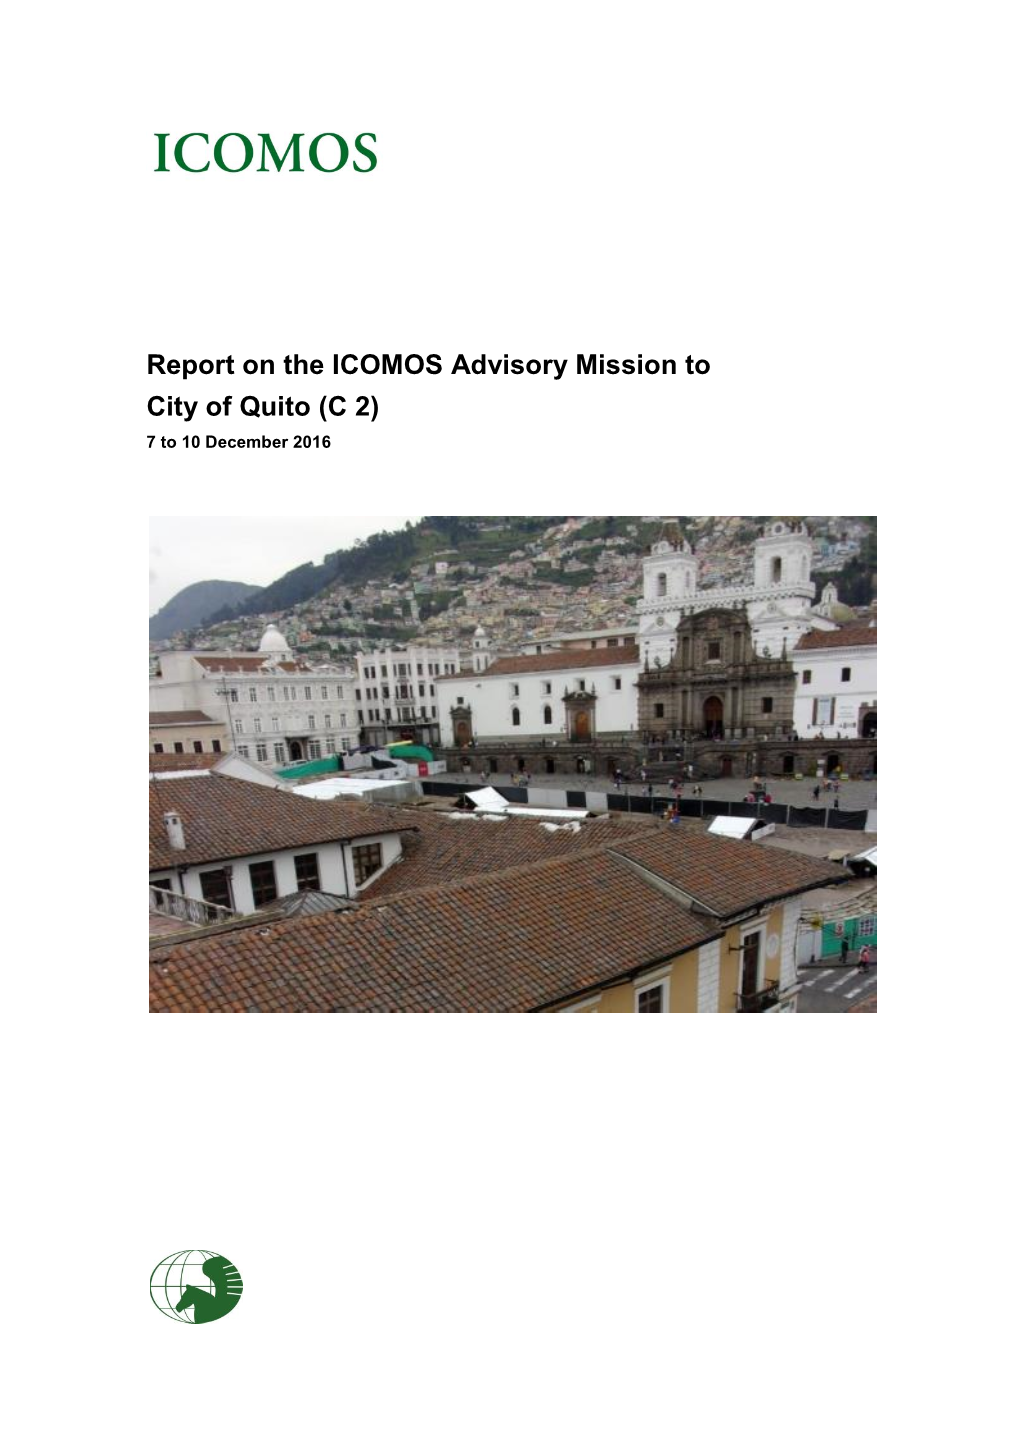 Report on the ICOMOS Advisory Mission to City of Quito (C 2) 7 to 10 December 2016